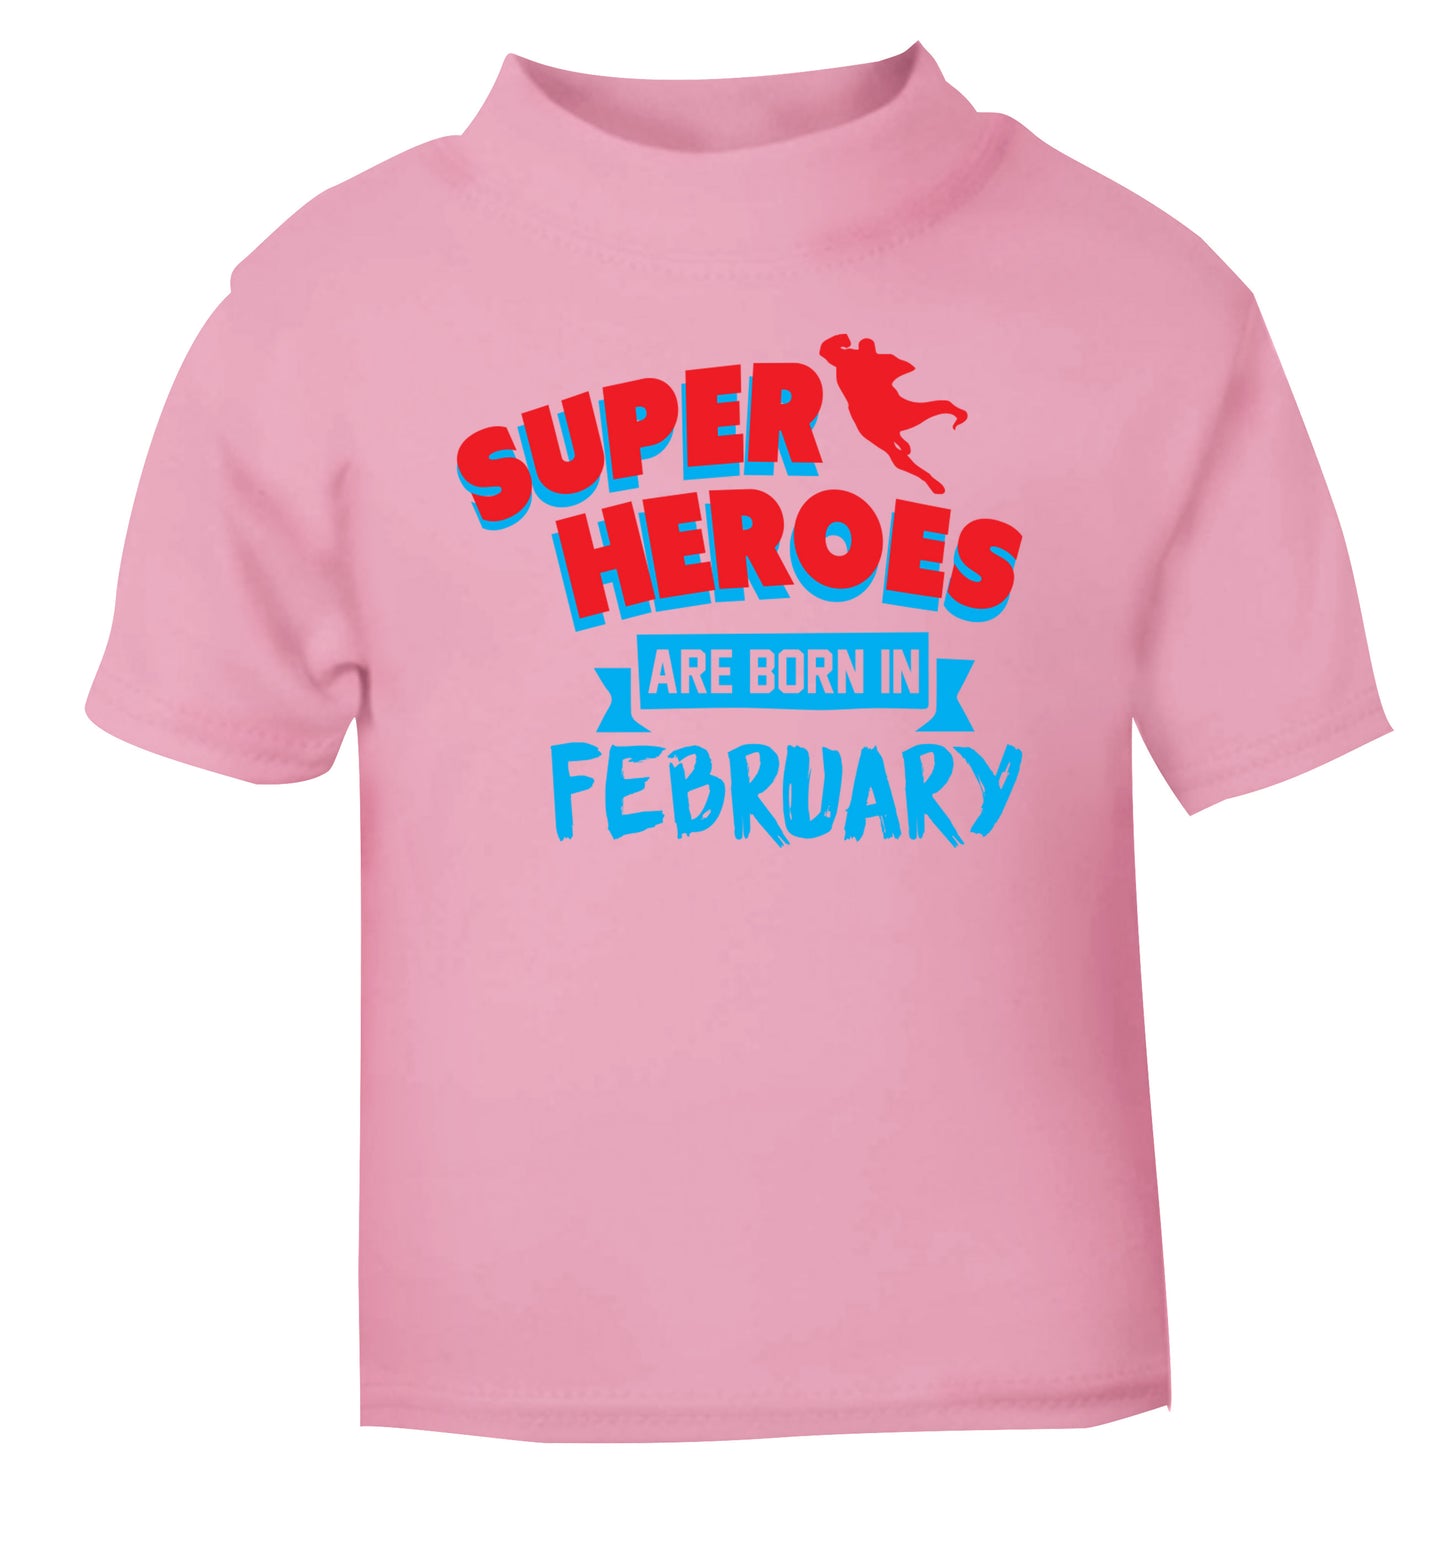 superheroes are born in February light pink Baby Toddler Tshirt 2 Years